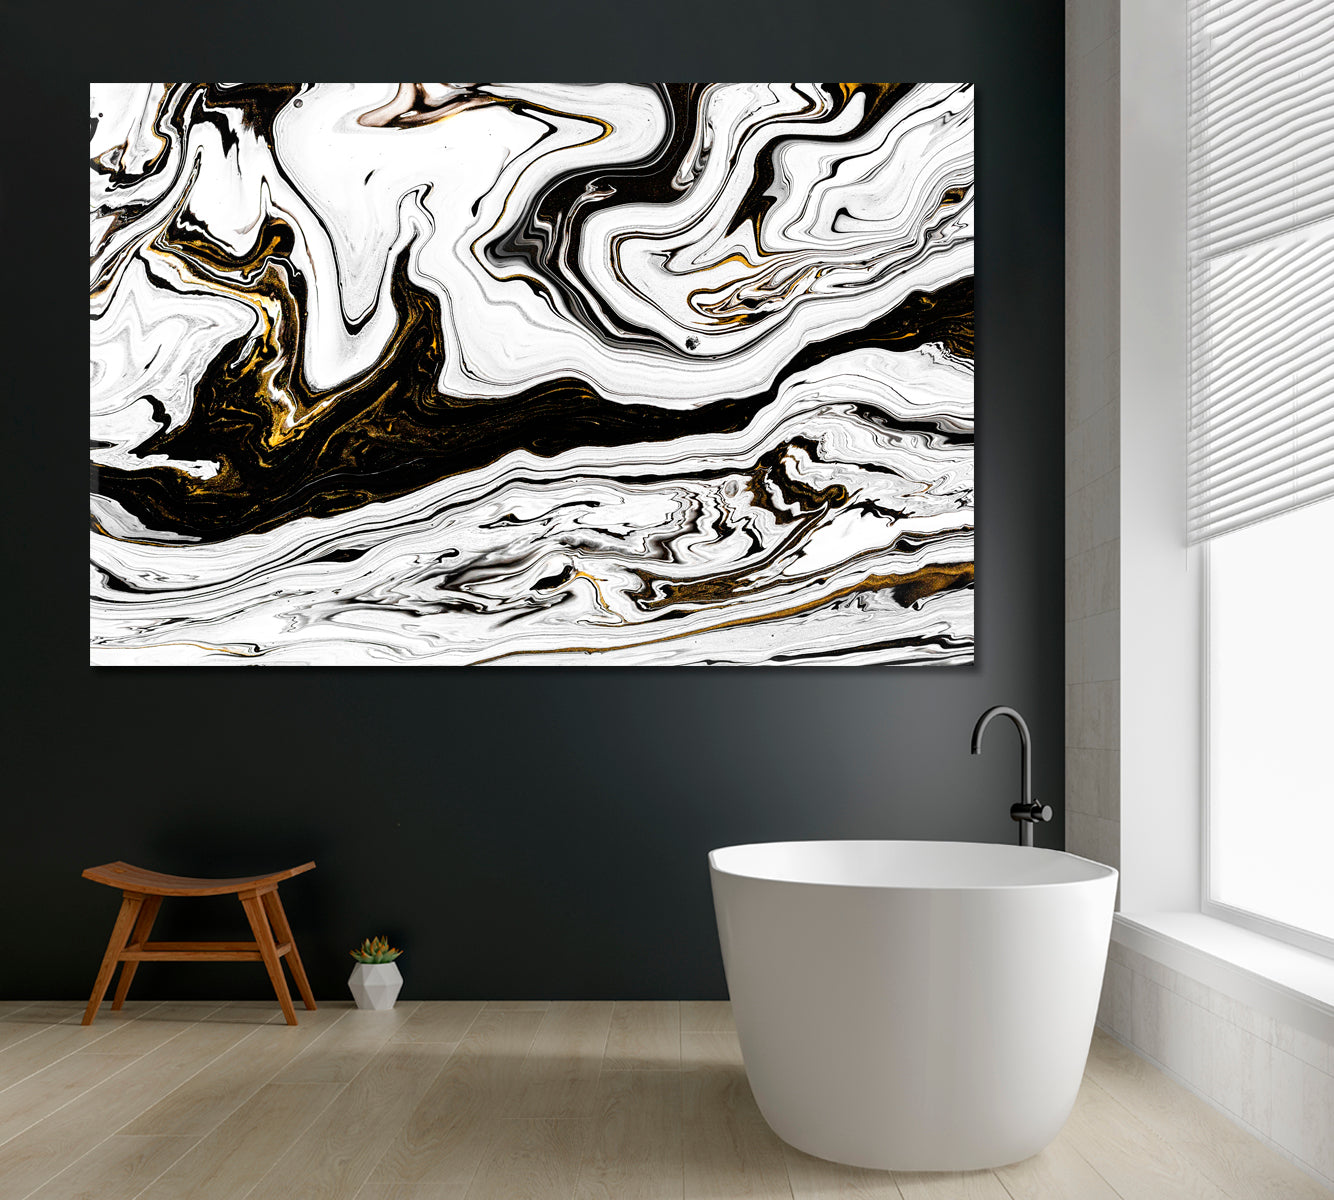 Black and White Marble Swirl Pattern Canvas Print ArtLexy 1 Panel 24"x16" inches 